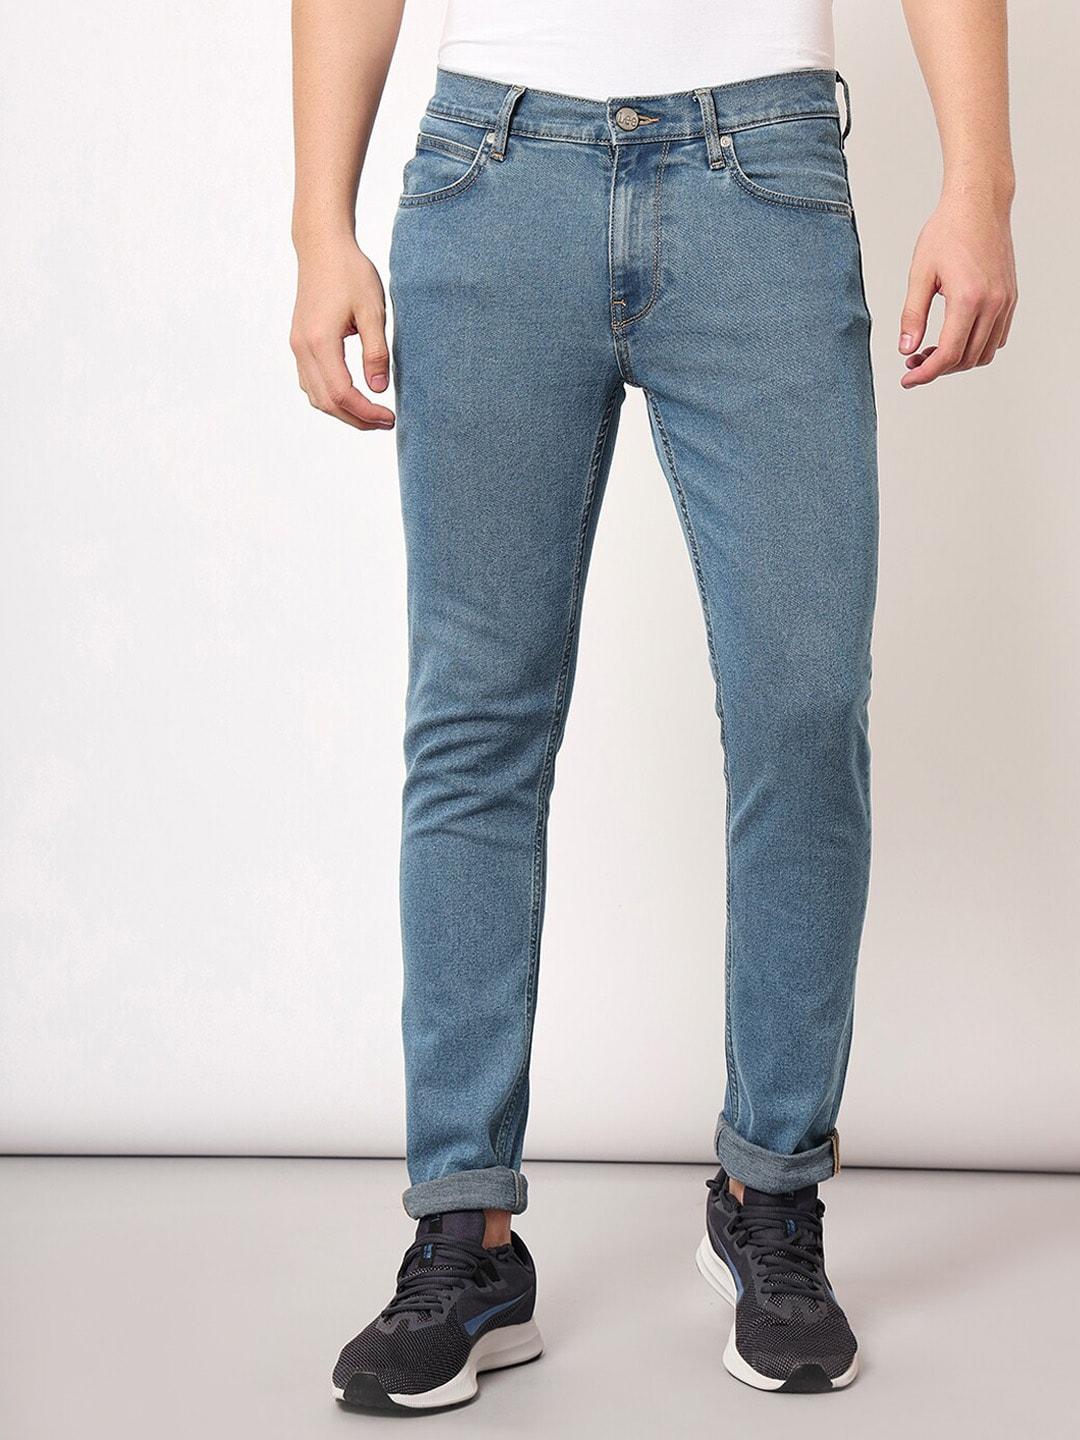 lee-men-mid-rise-slim-fit-clean-look-light-fade-stretchable-jeans